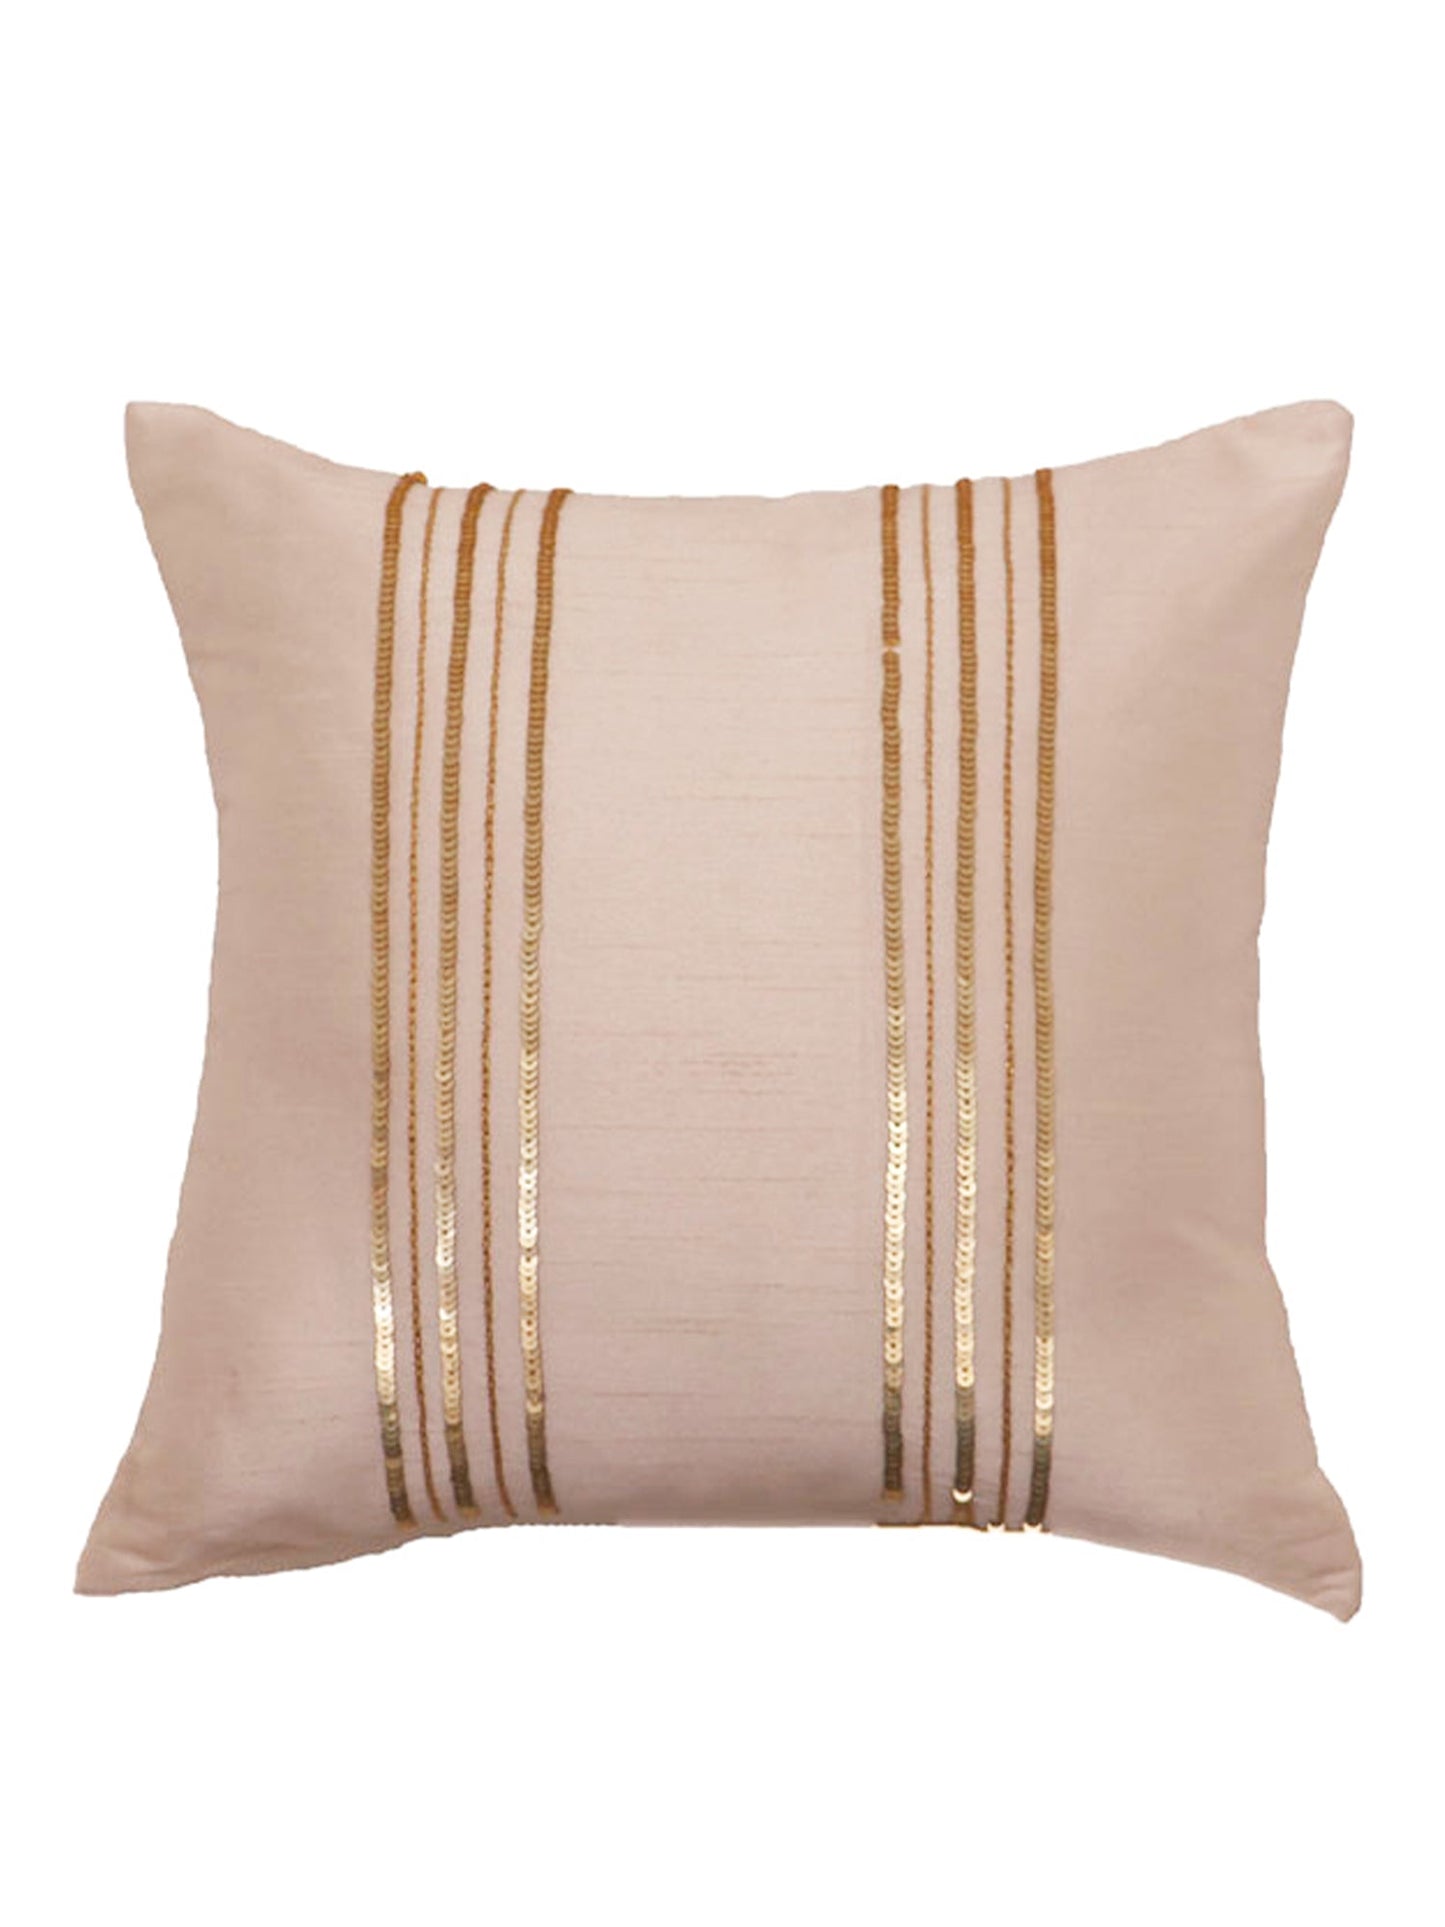 Embroidered Cushion Cover 100% Polyester  Sequin Stripes Off White - 12" X 12"